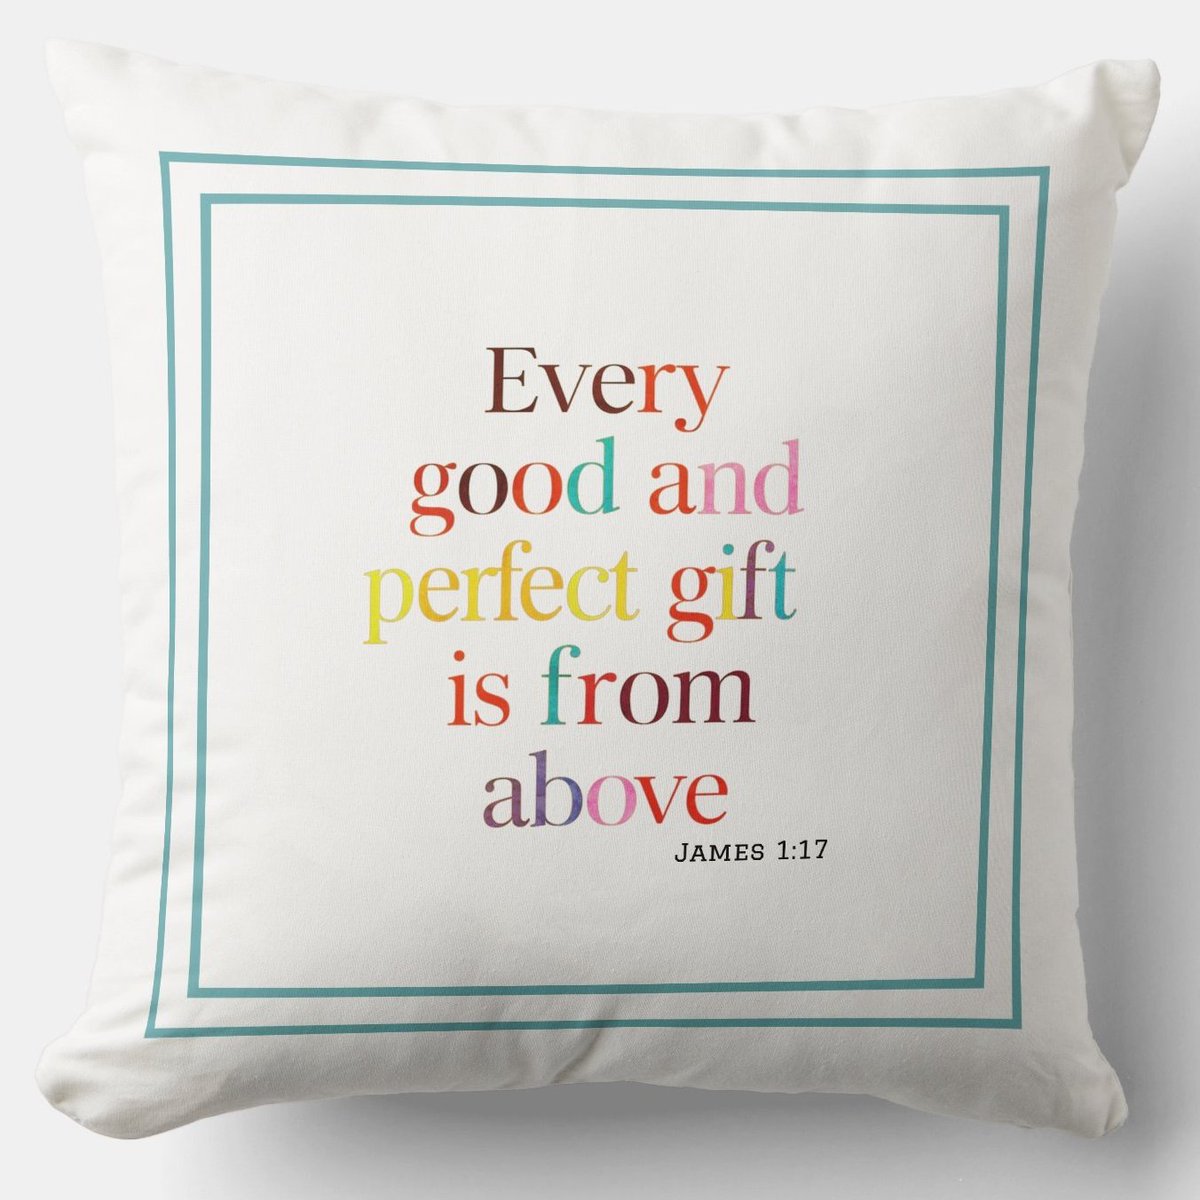 Every Good And Perfect #Gift Is From Above zazzle.com/every_good_and… / #Blessings #Pillow #JesusChrist #JesusSaves #christian #spiritual #Homedecoration #uniquegift #giftideas #giftforhim #giftidea #HolySpirit #pillows #giftshop #giftsforher #giftsforfriend #faith #hope #bibleverse